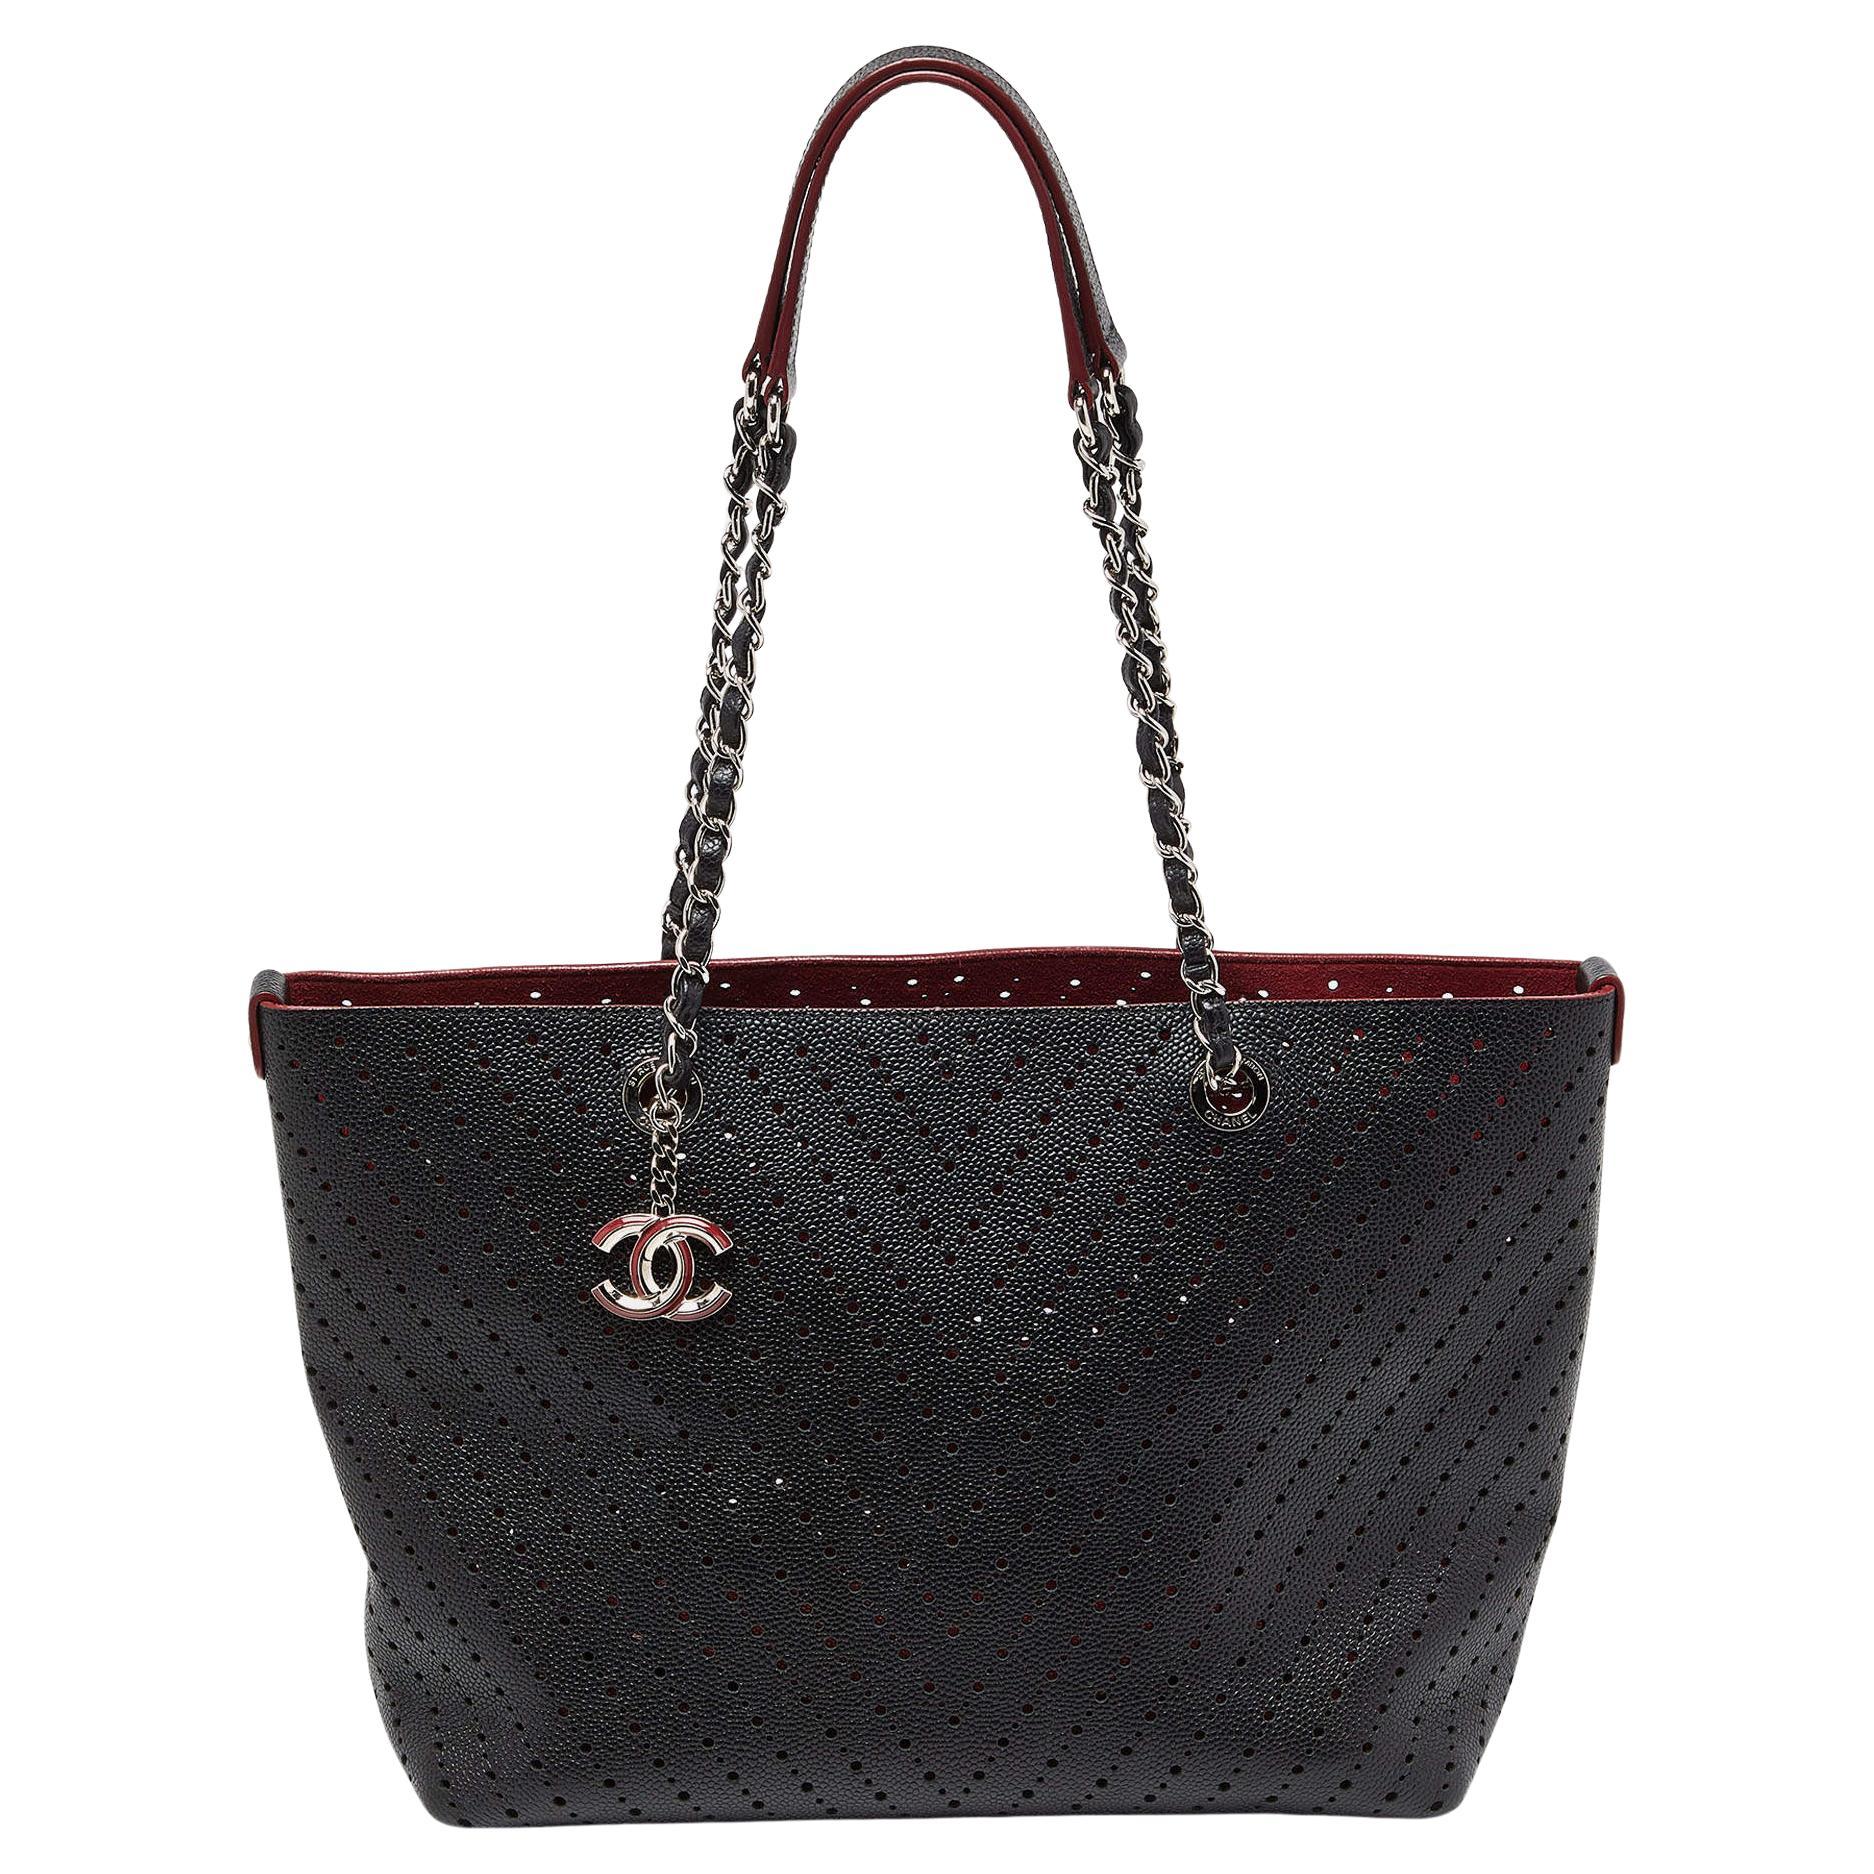 Chanel Black Perforated Caviar Leather Medium Shopper Tote For Sale